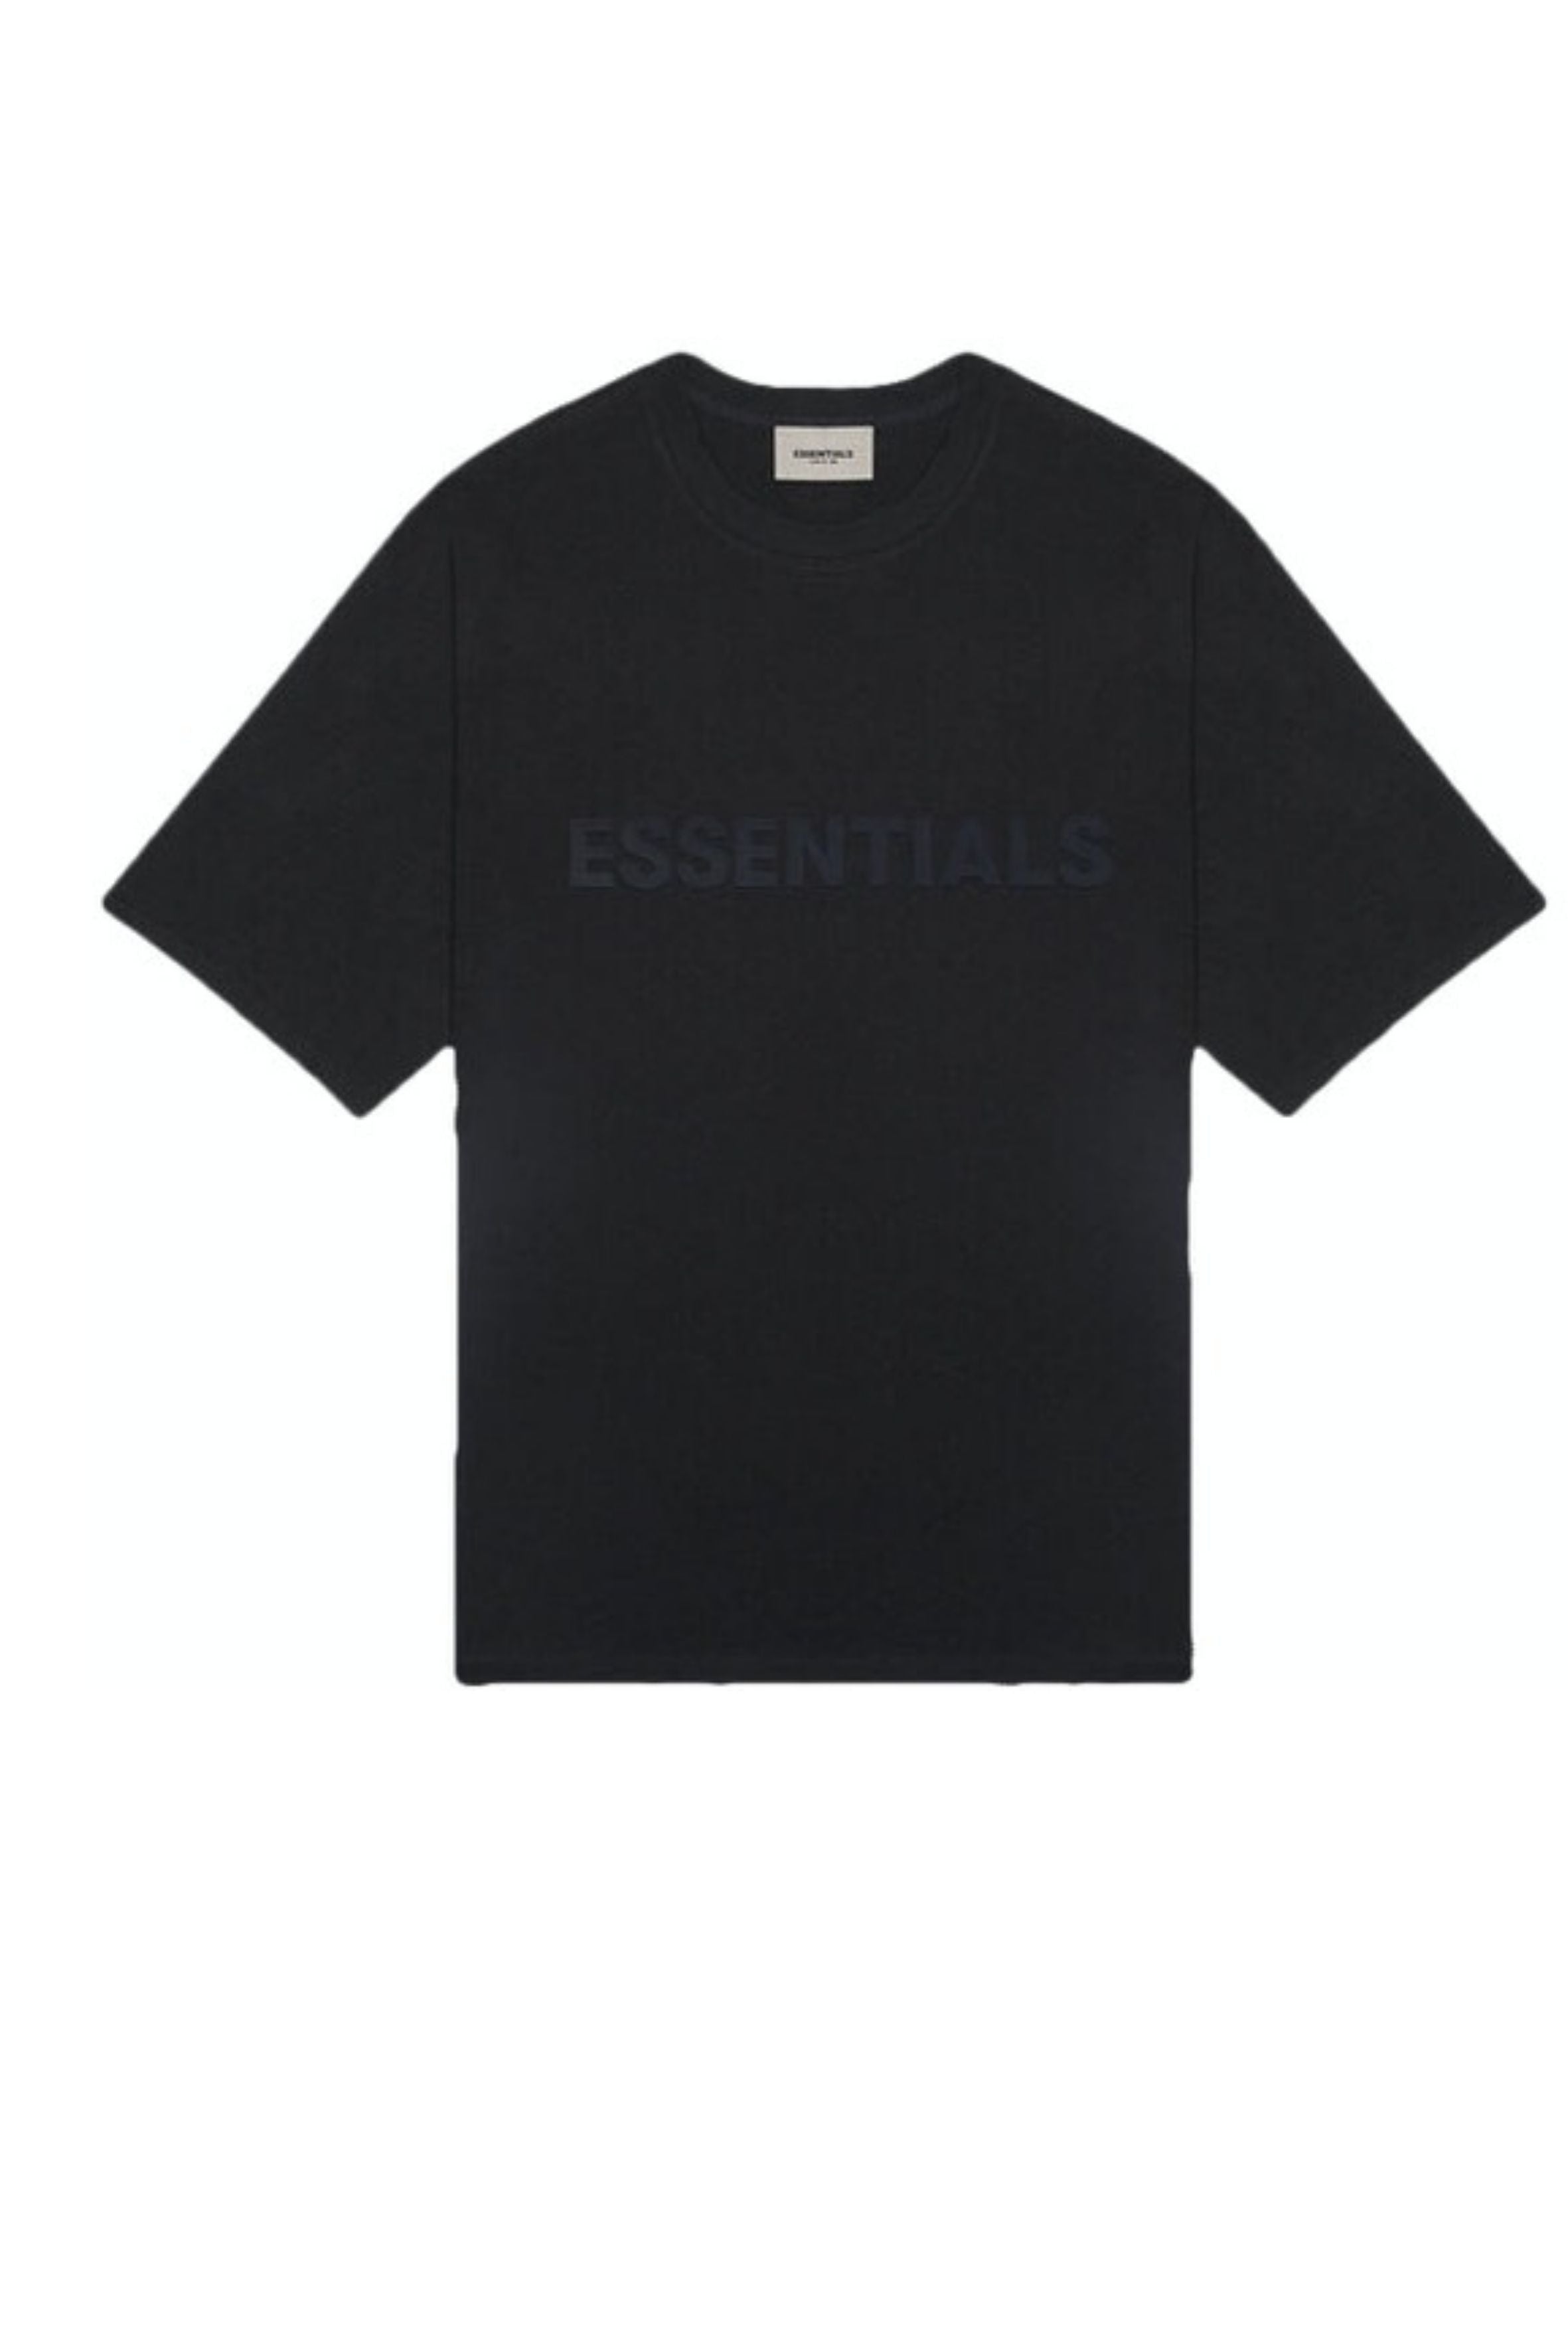 FOG Fear of God Essentials Boxy Tee 3D Silcon Black – Curated by Charbel